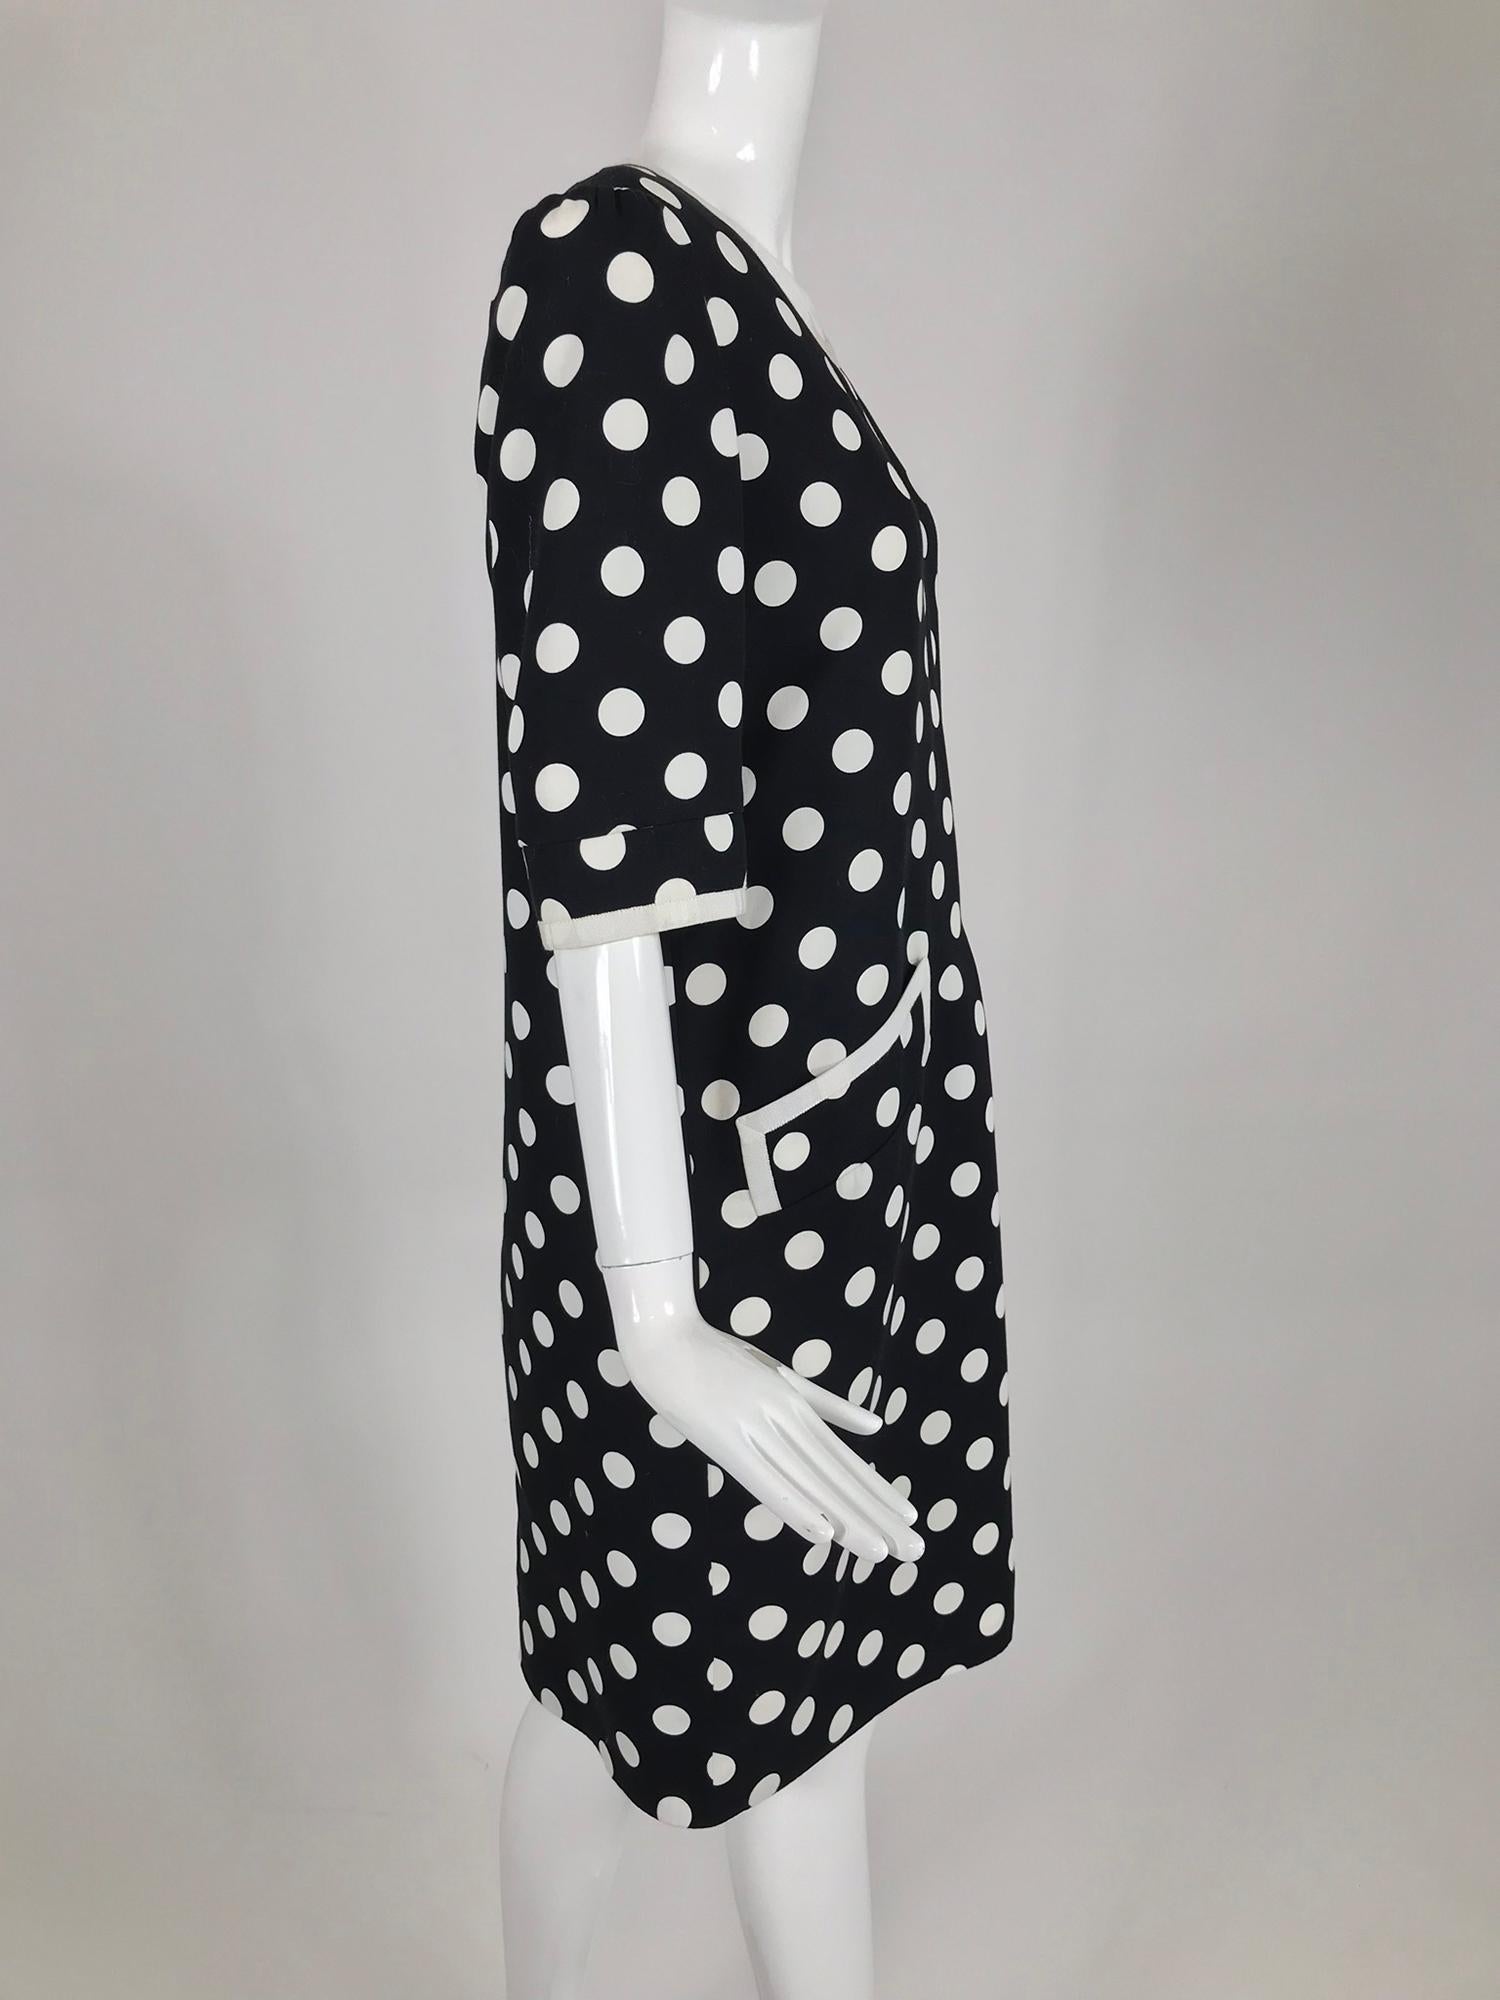 Givenchy Couture Black and White Cotton Polka Dot Day Dress 1980s In Good Condition For Sale In West Palm Beach, FL